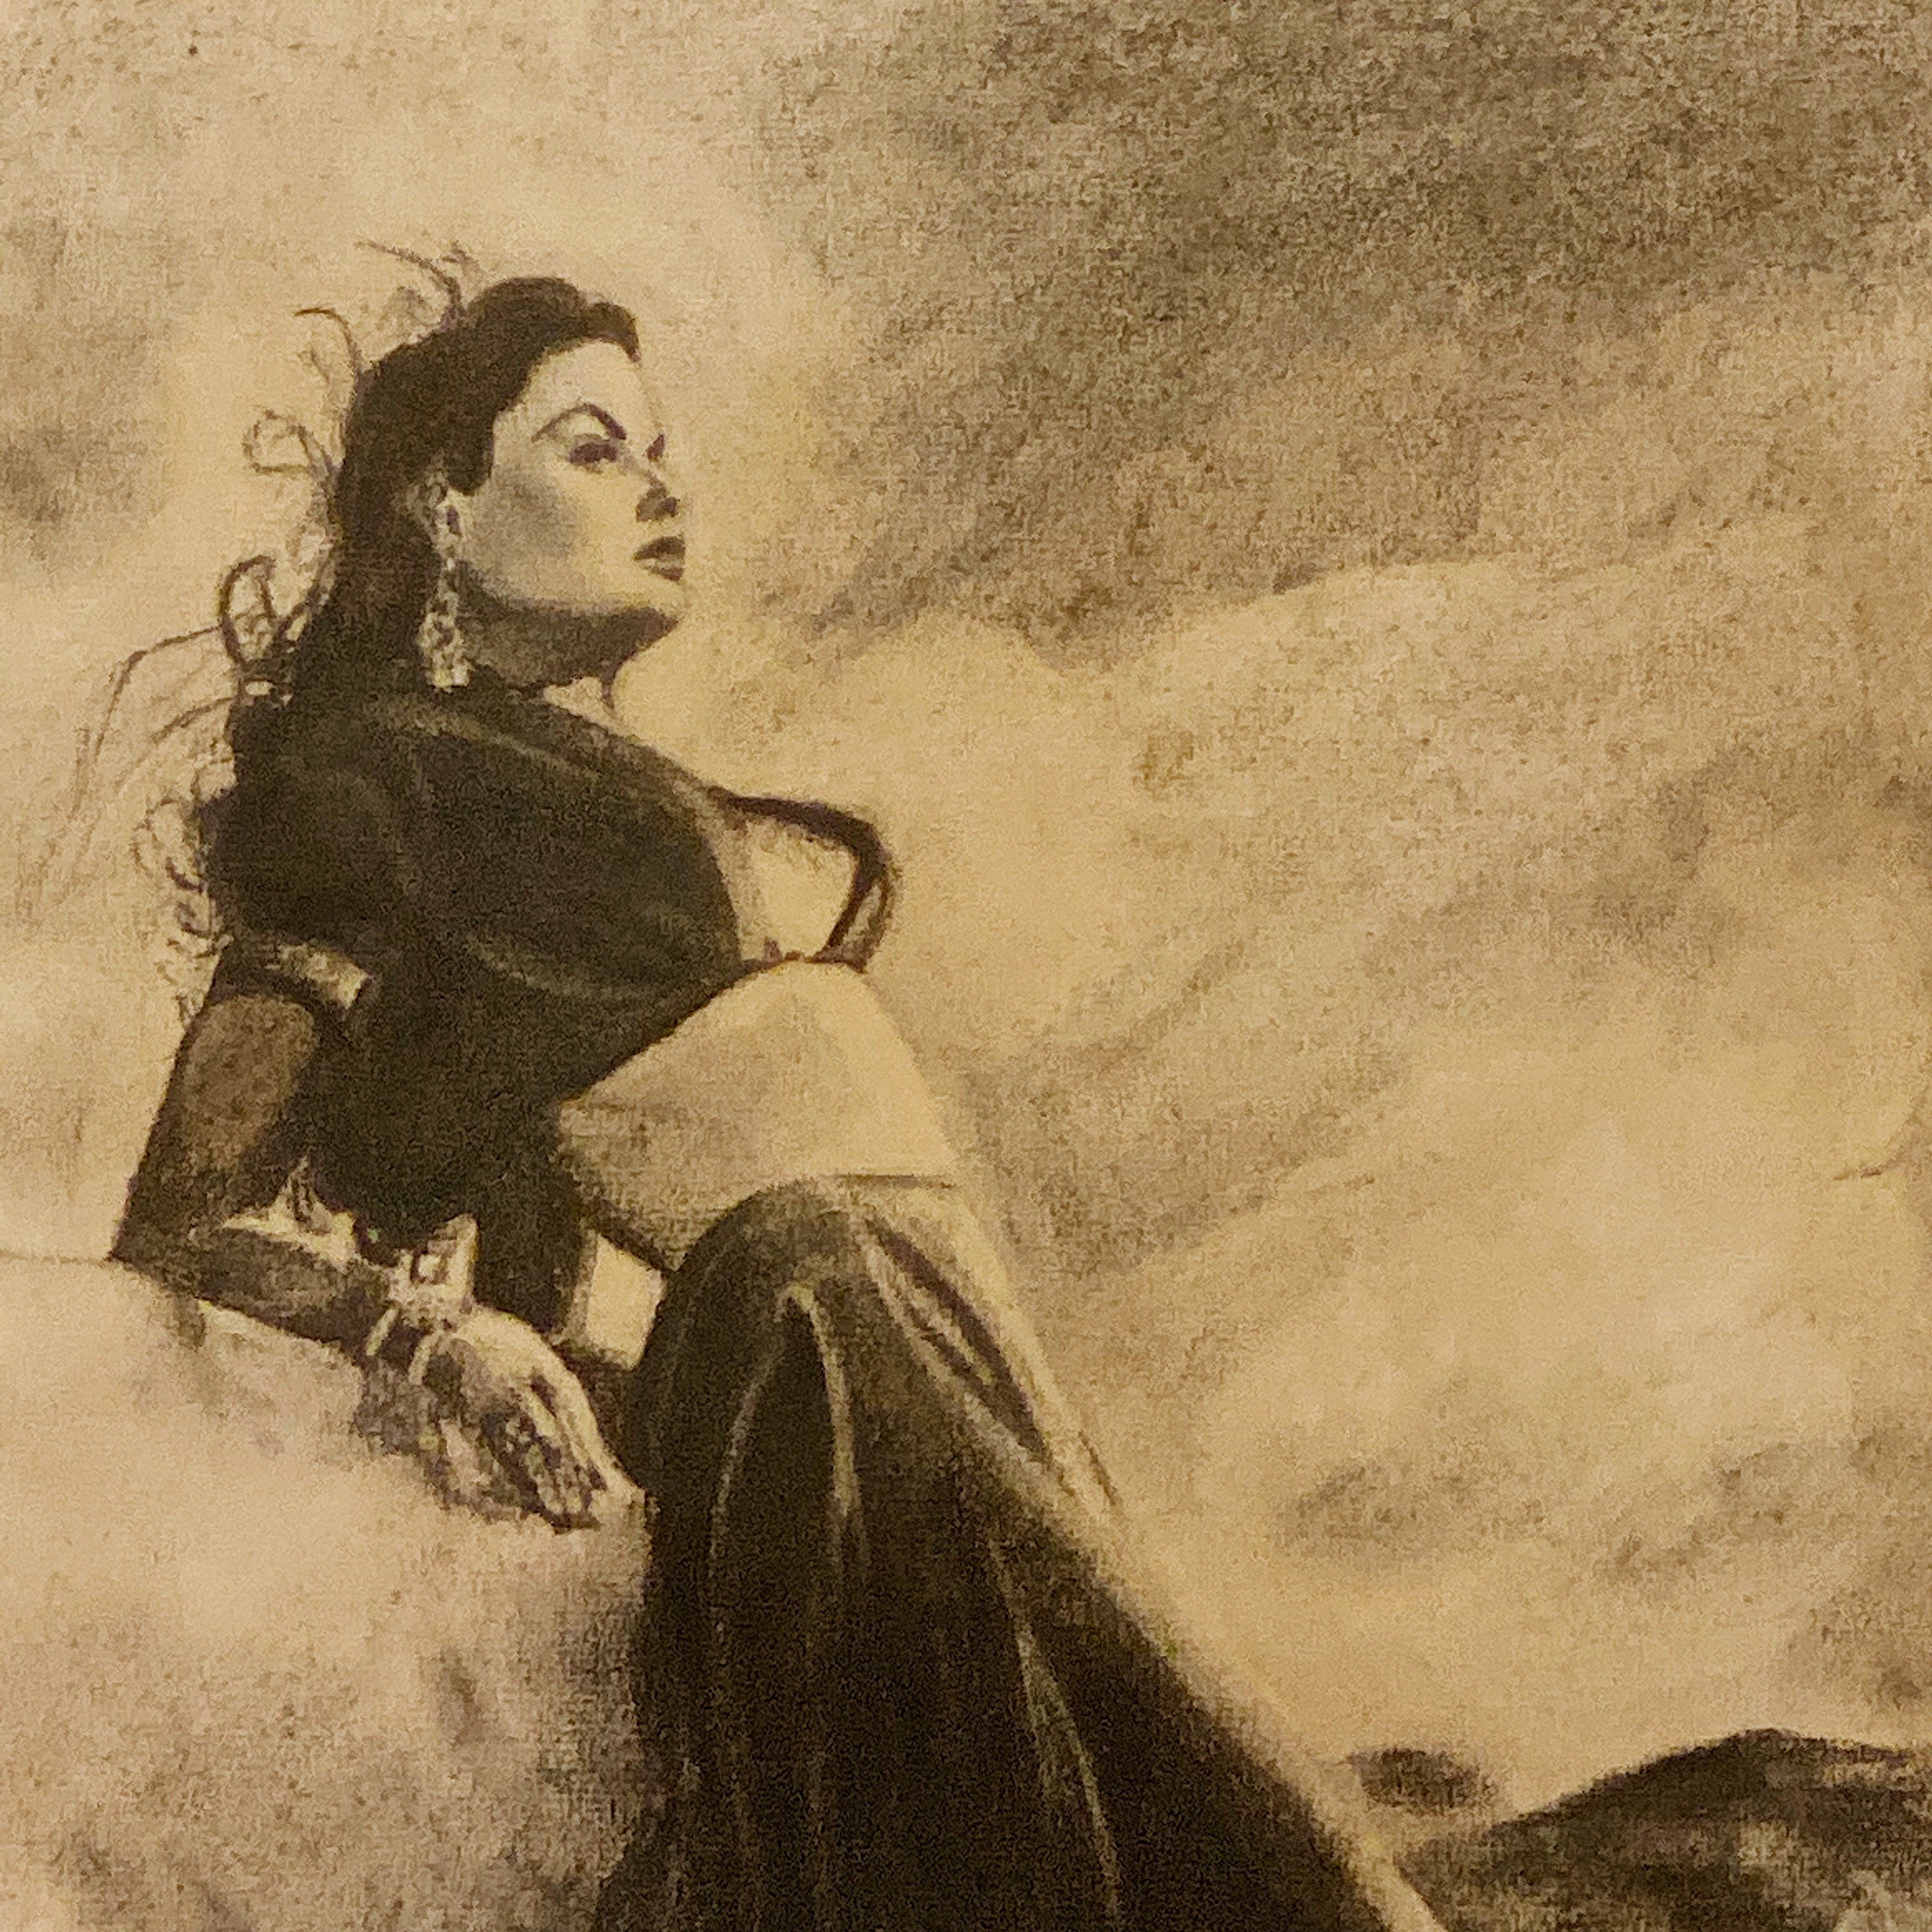 Tony Charmoli Charcoal Drawing of Belly Dancer - 1960s - Vintage Hollywood Artwork - Pin Up Art - Entertainment Artist - Rare Signed Sexy